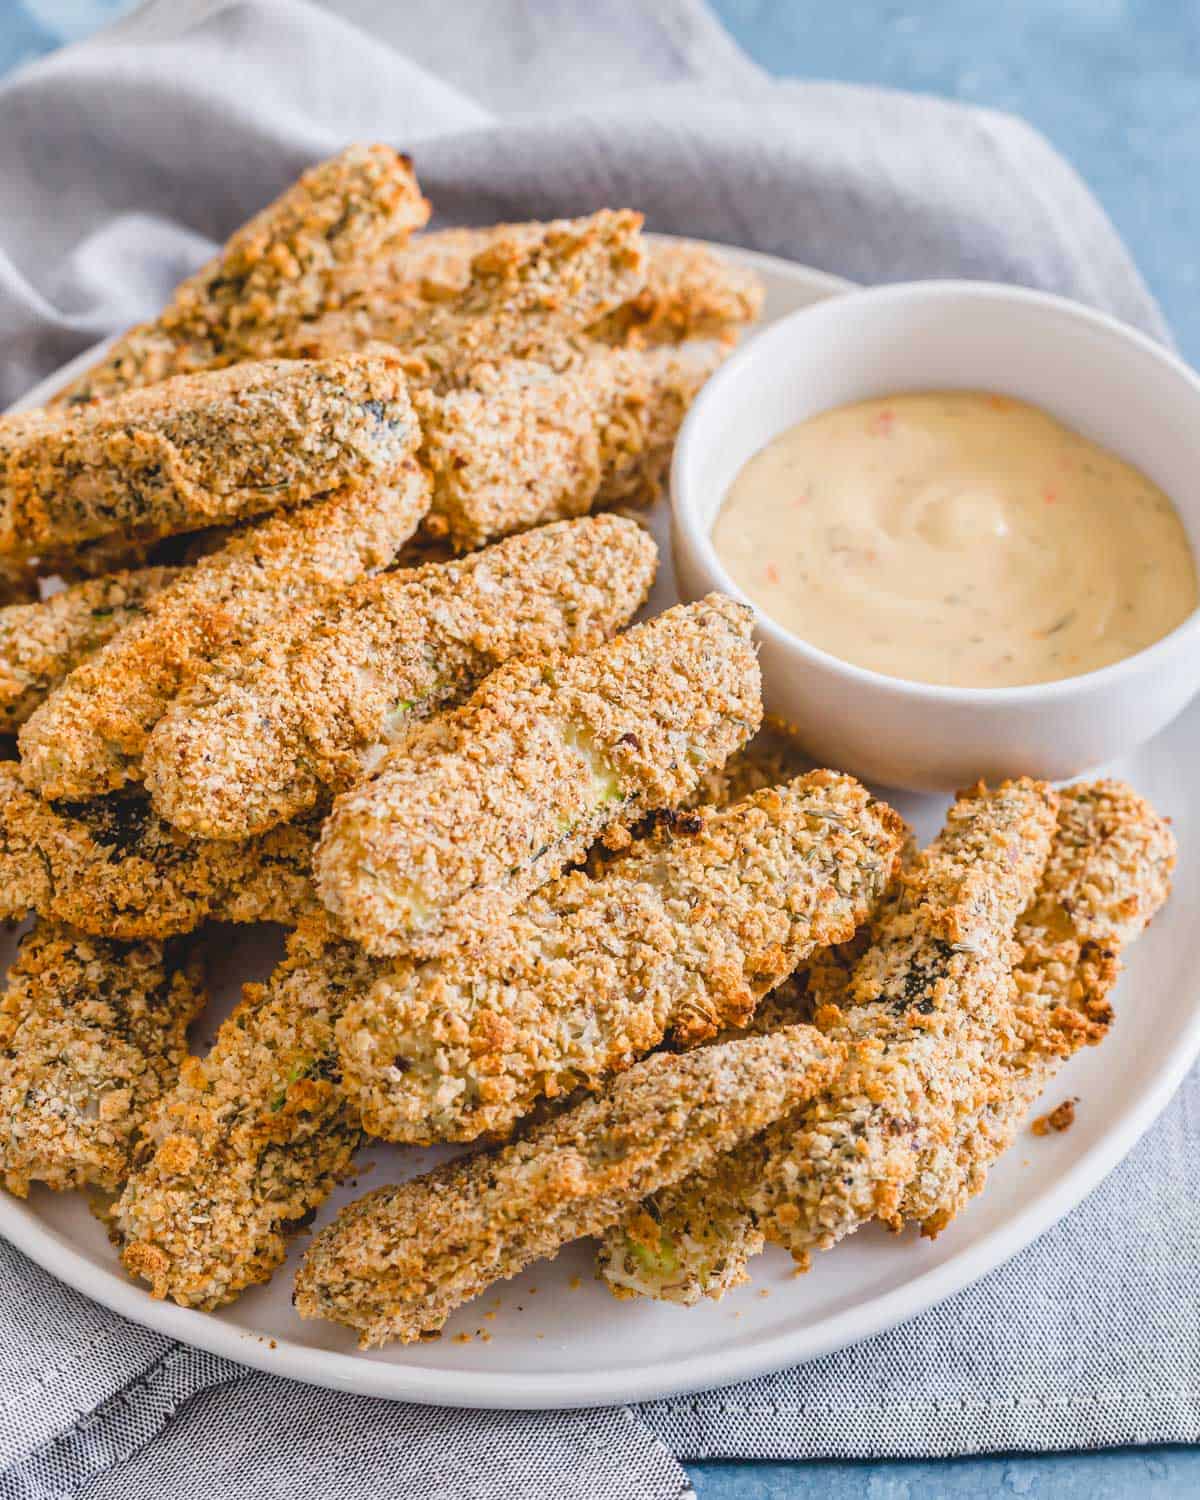 Vegan zucchini fries on a plate with dipping sauce in a white bowl.